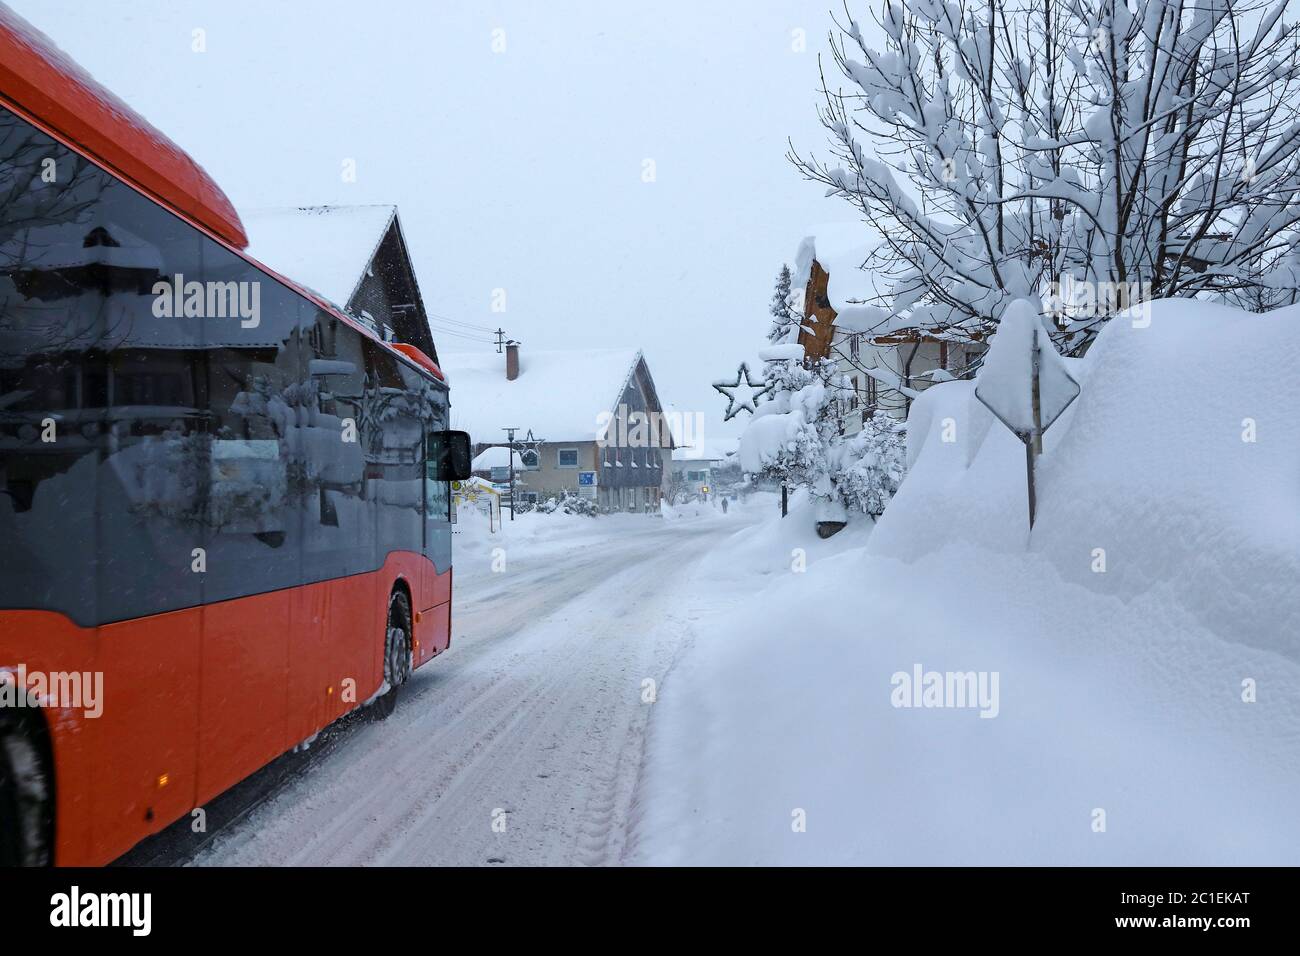 Delays in public transport due to heavy snowfall. A bus has difficulties on the snow-covered road in winter. Stock Photo